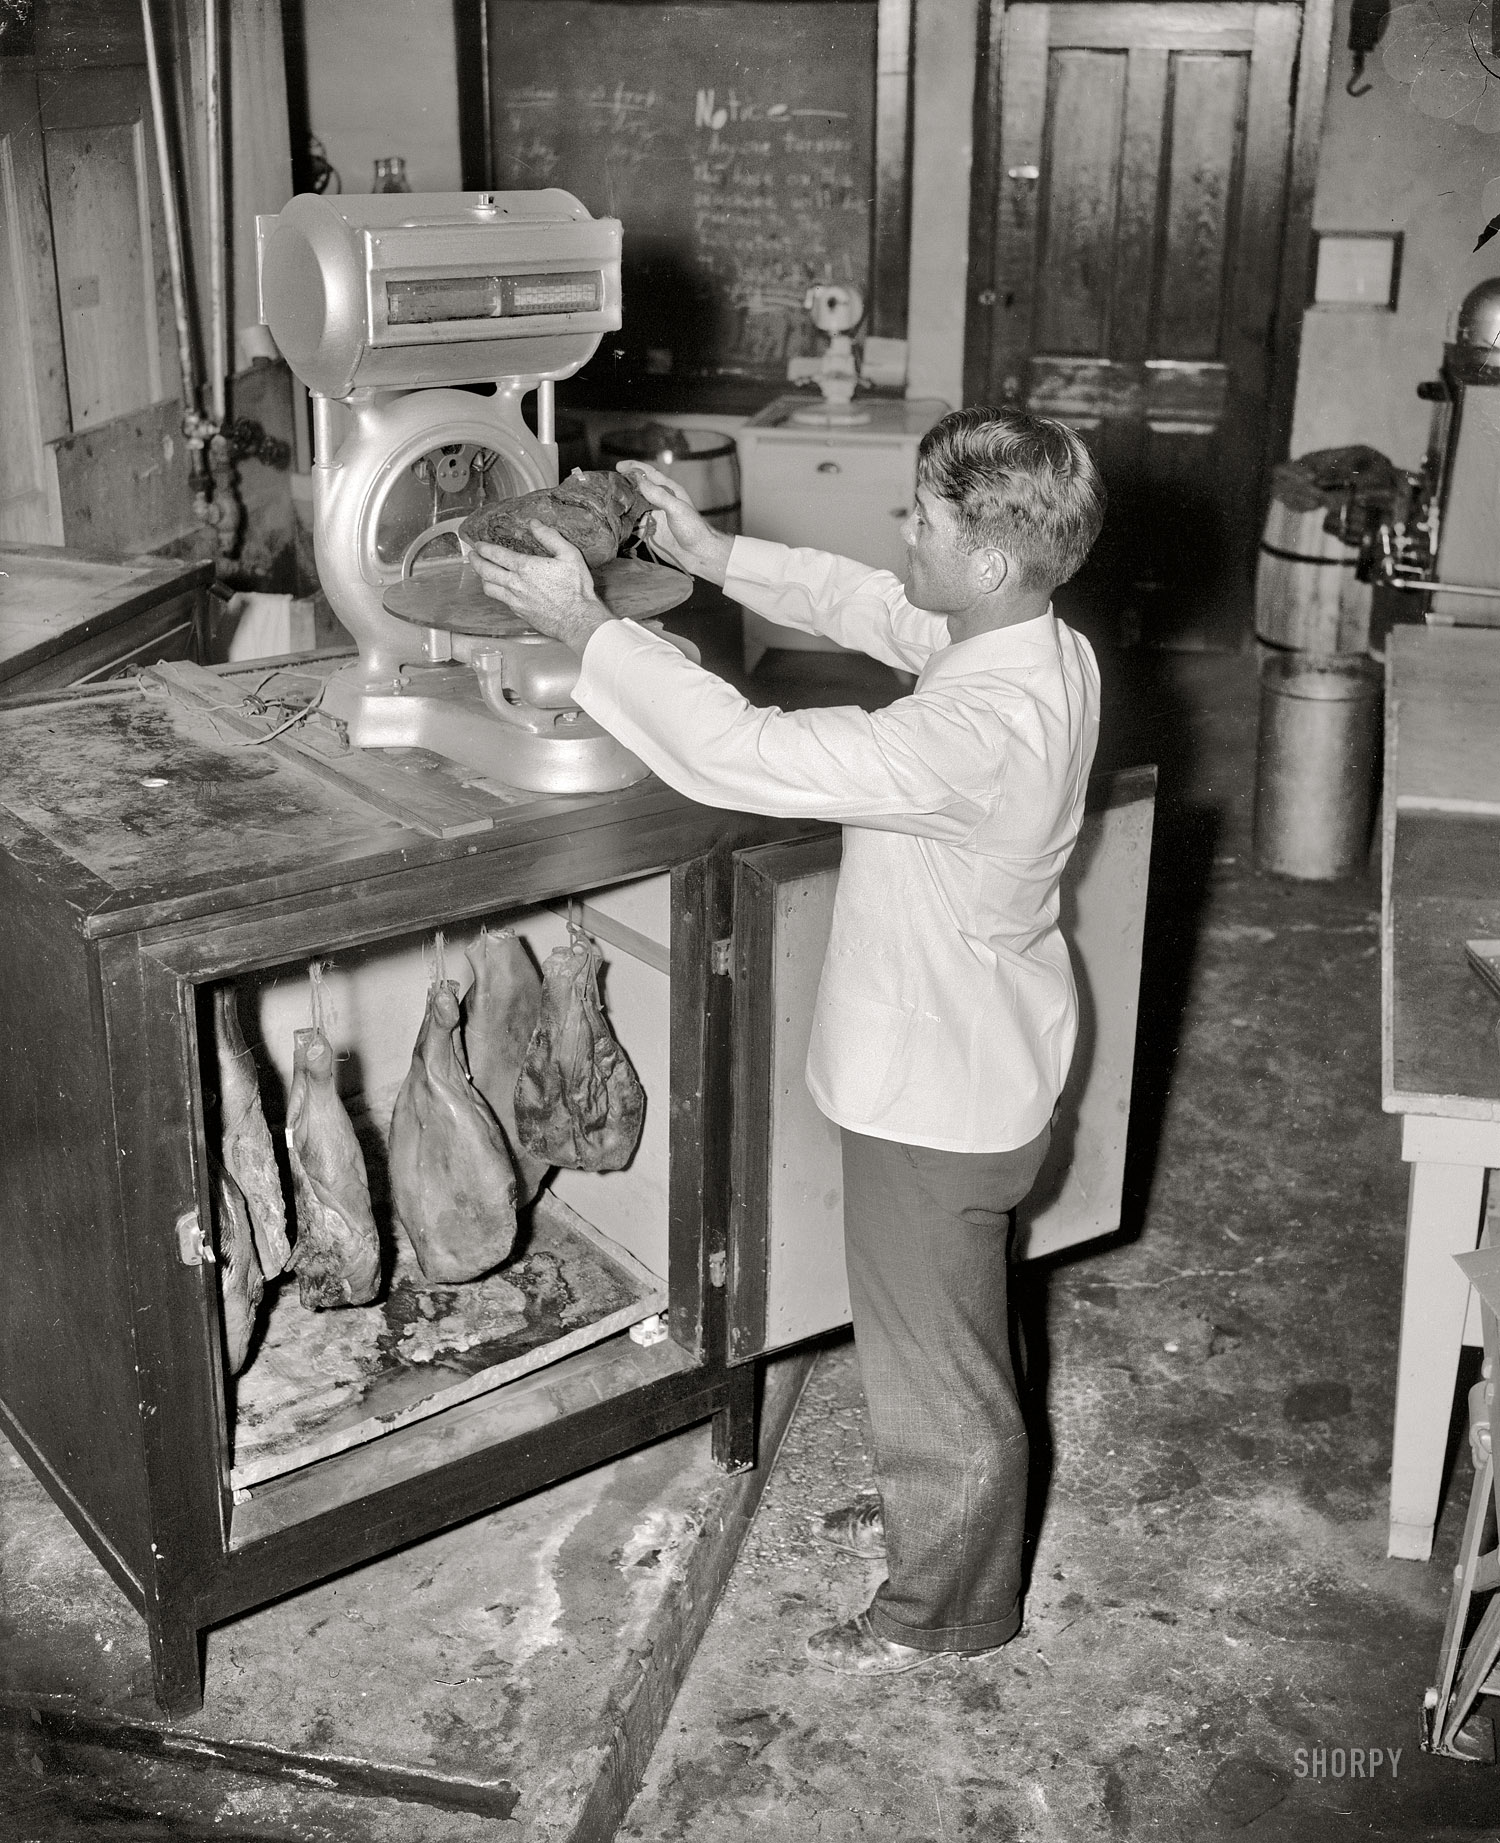 1937. College Park, Maryland. "Hams. From time to time the hams are taken from the incubator by Mr. Carroll and weighed to check the shrinkage caused during the aging process." Harris & Ewing Collection glass negative. View full size.